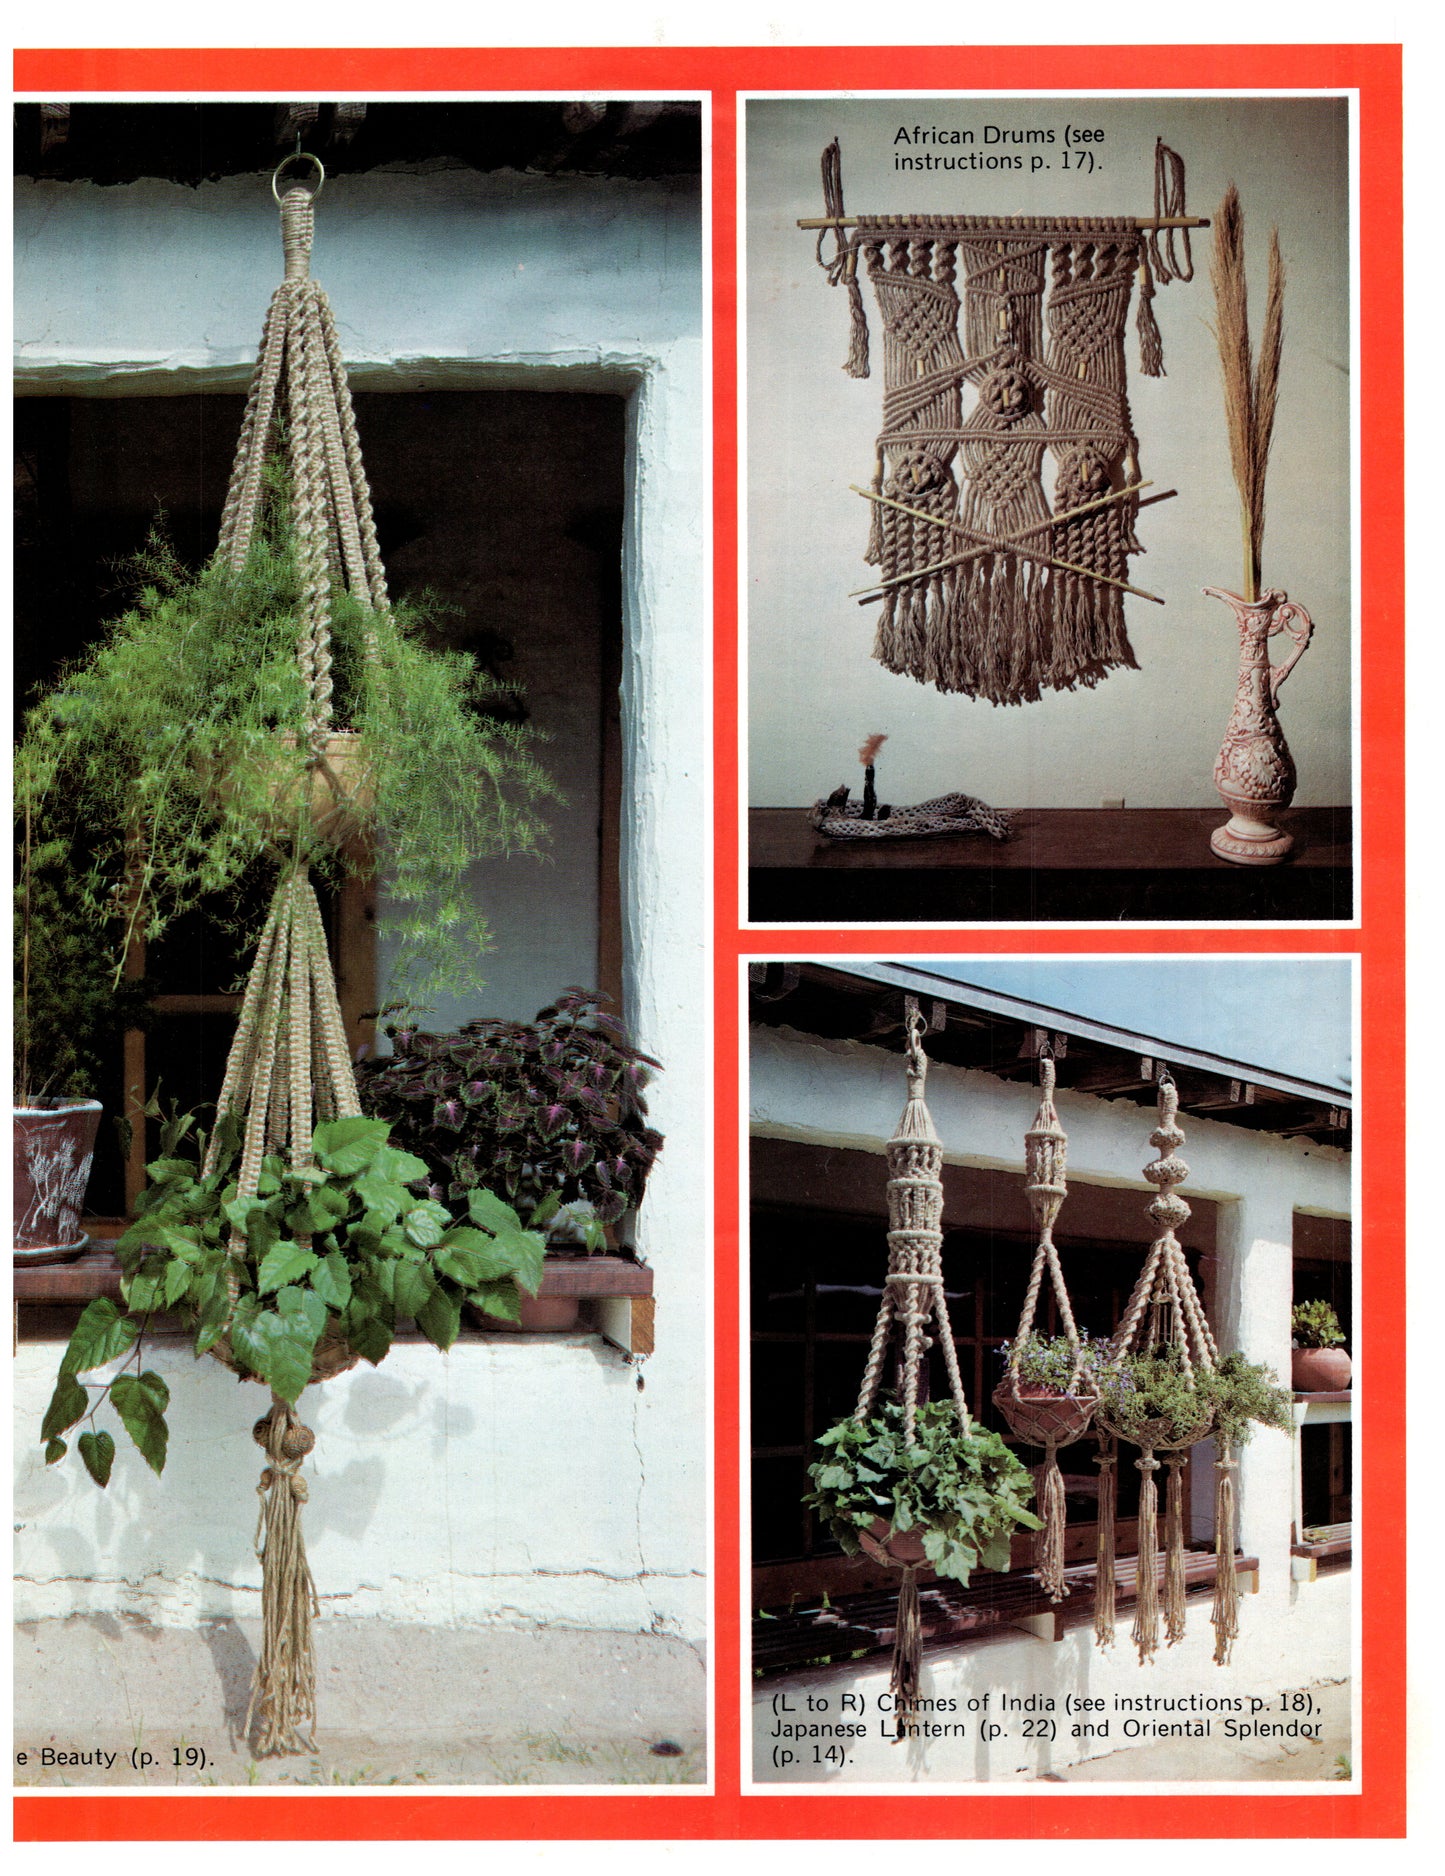 Vintage Macrame Hangers Pattern Book Plant Holders Hangings Knots Knotted Download PDF Instructions Home Decorating - At Grandma's Table